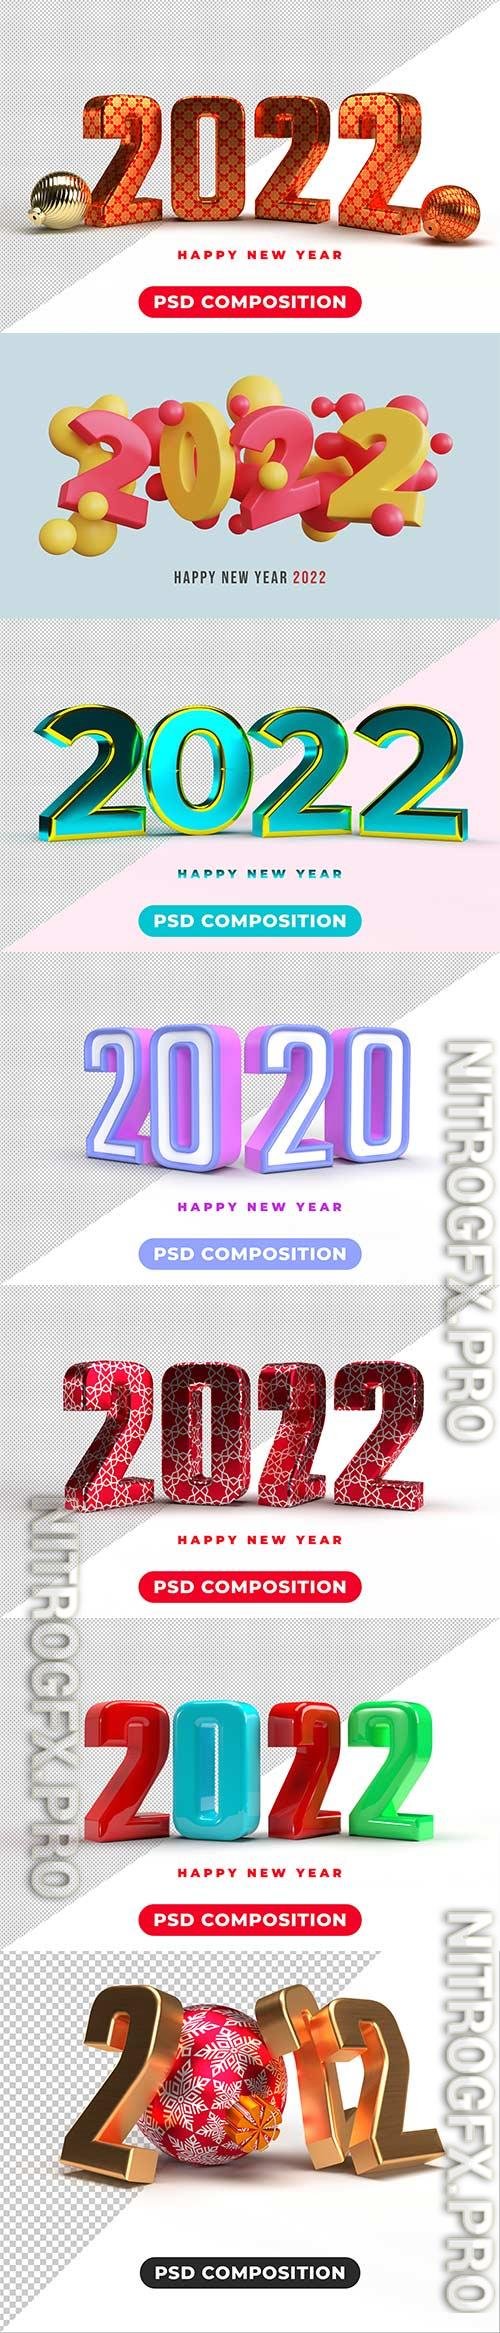 3d happy new year 2022 number psd background